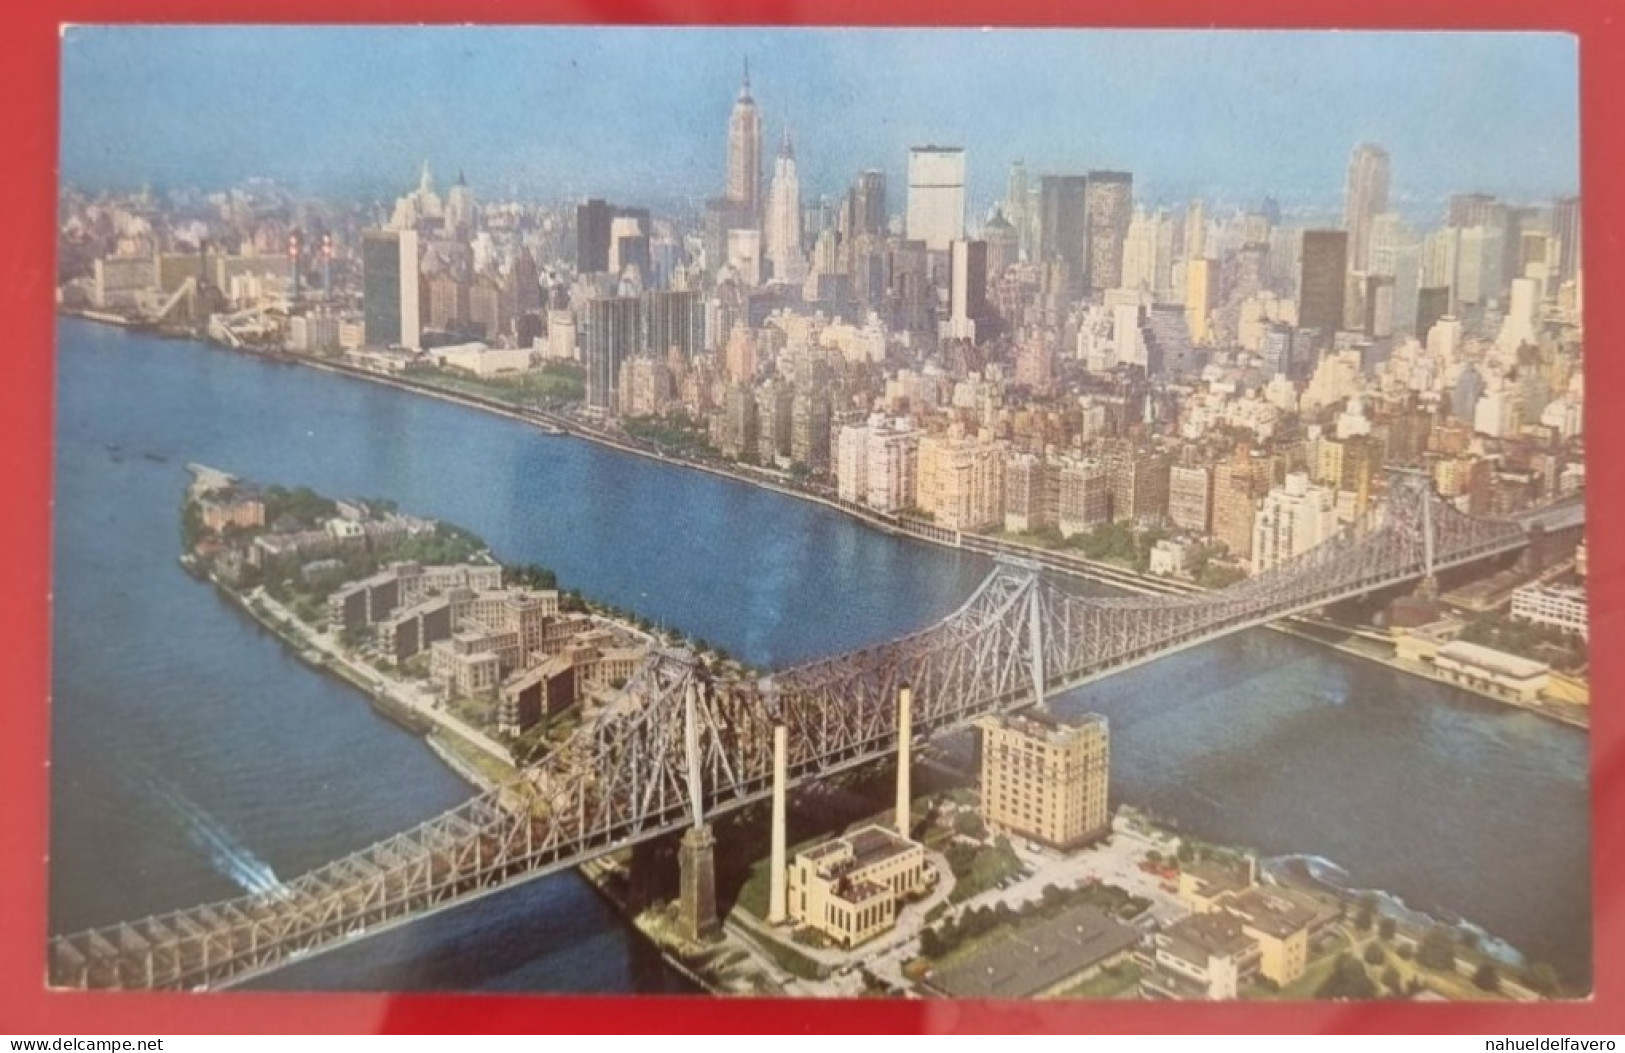 Uncirculated Postcard - USA - NY, NEW YORK CITY - AERIAL VIEW OF 59TH ST. BRIDGE - Ponti E Gallerie